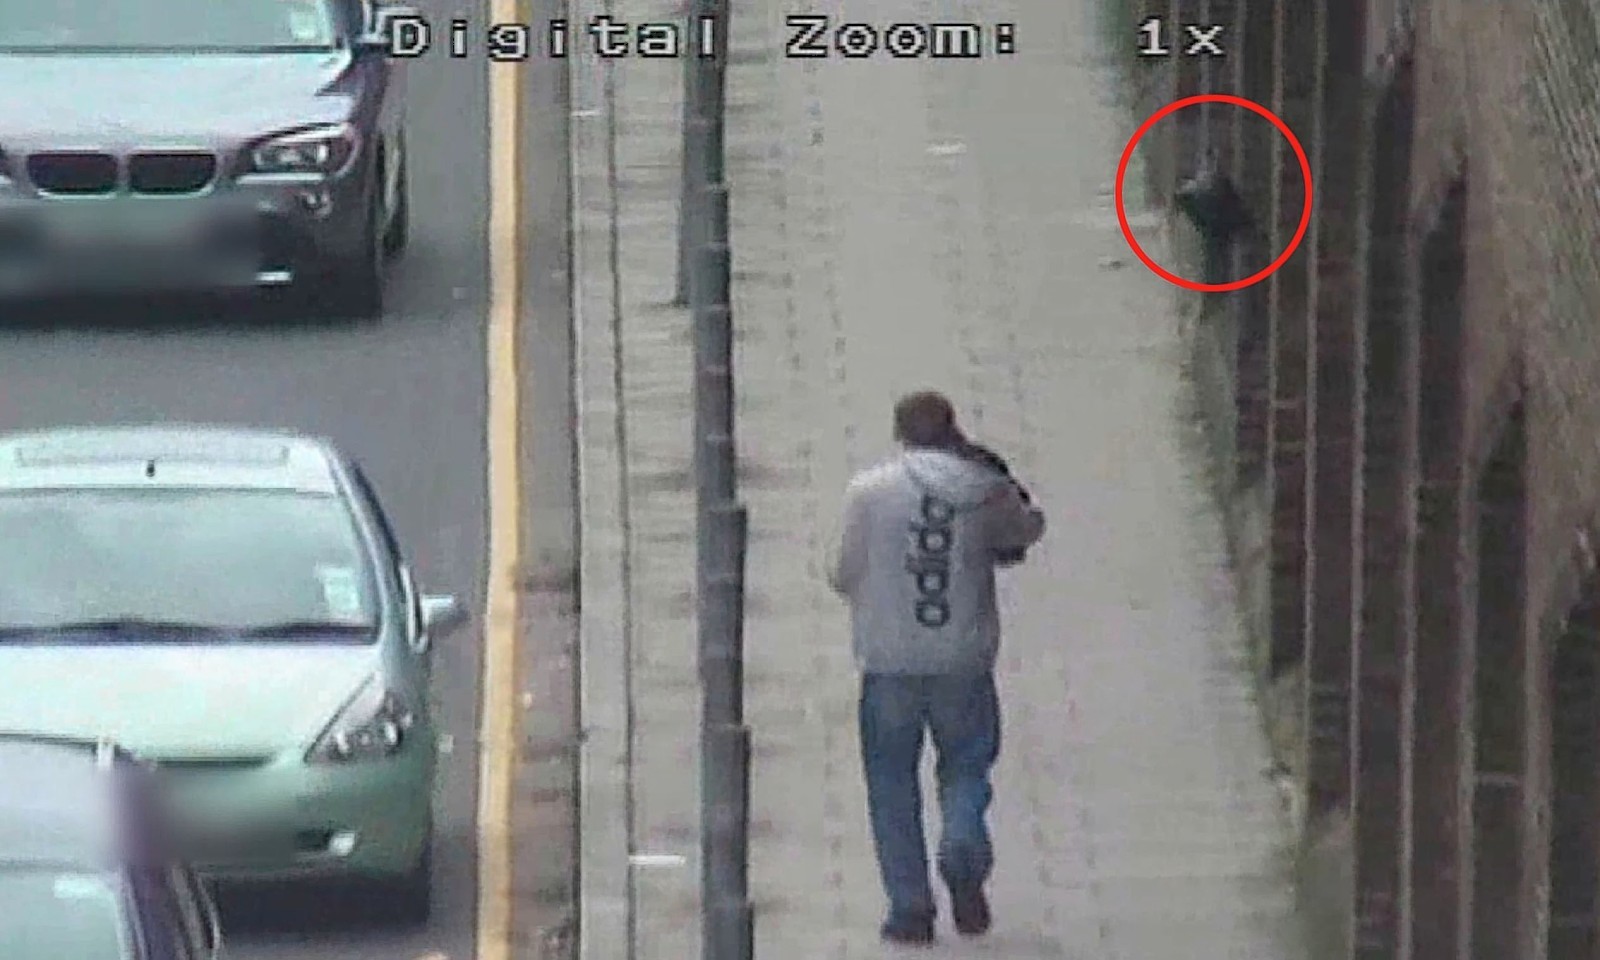 The CCTV footage showing Karl Jensen using a fishing line to smuggle banned goods